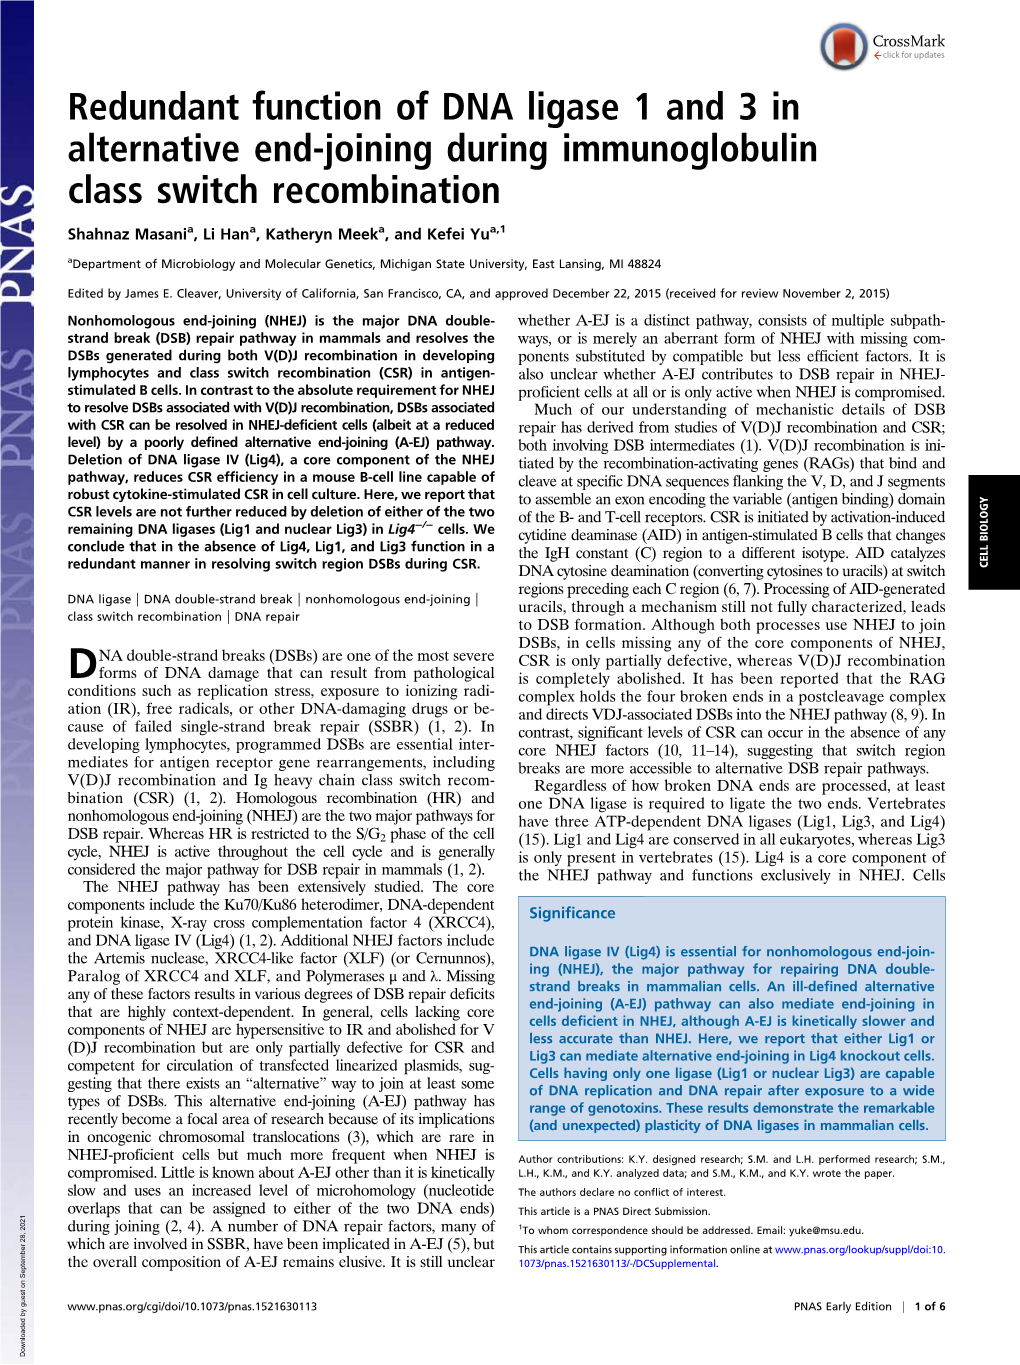 Redundant Function of DNA Ligase 1 and 3 in Alternative End-Joining During Immunoglobulin Class Switch Recombination